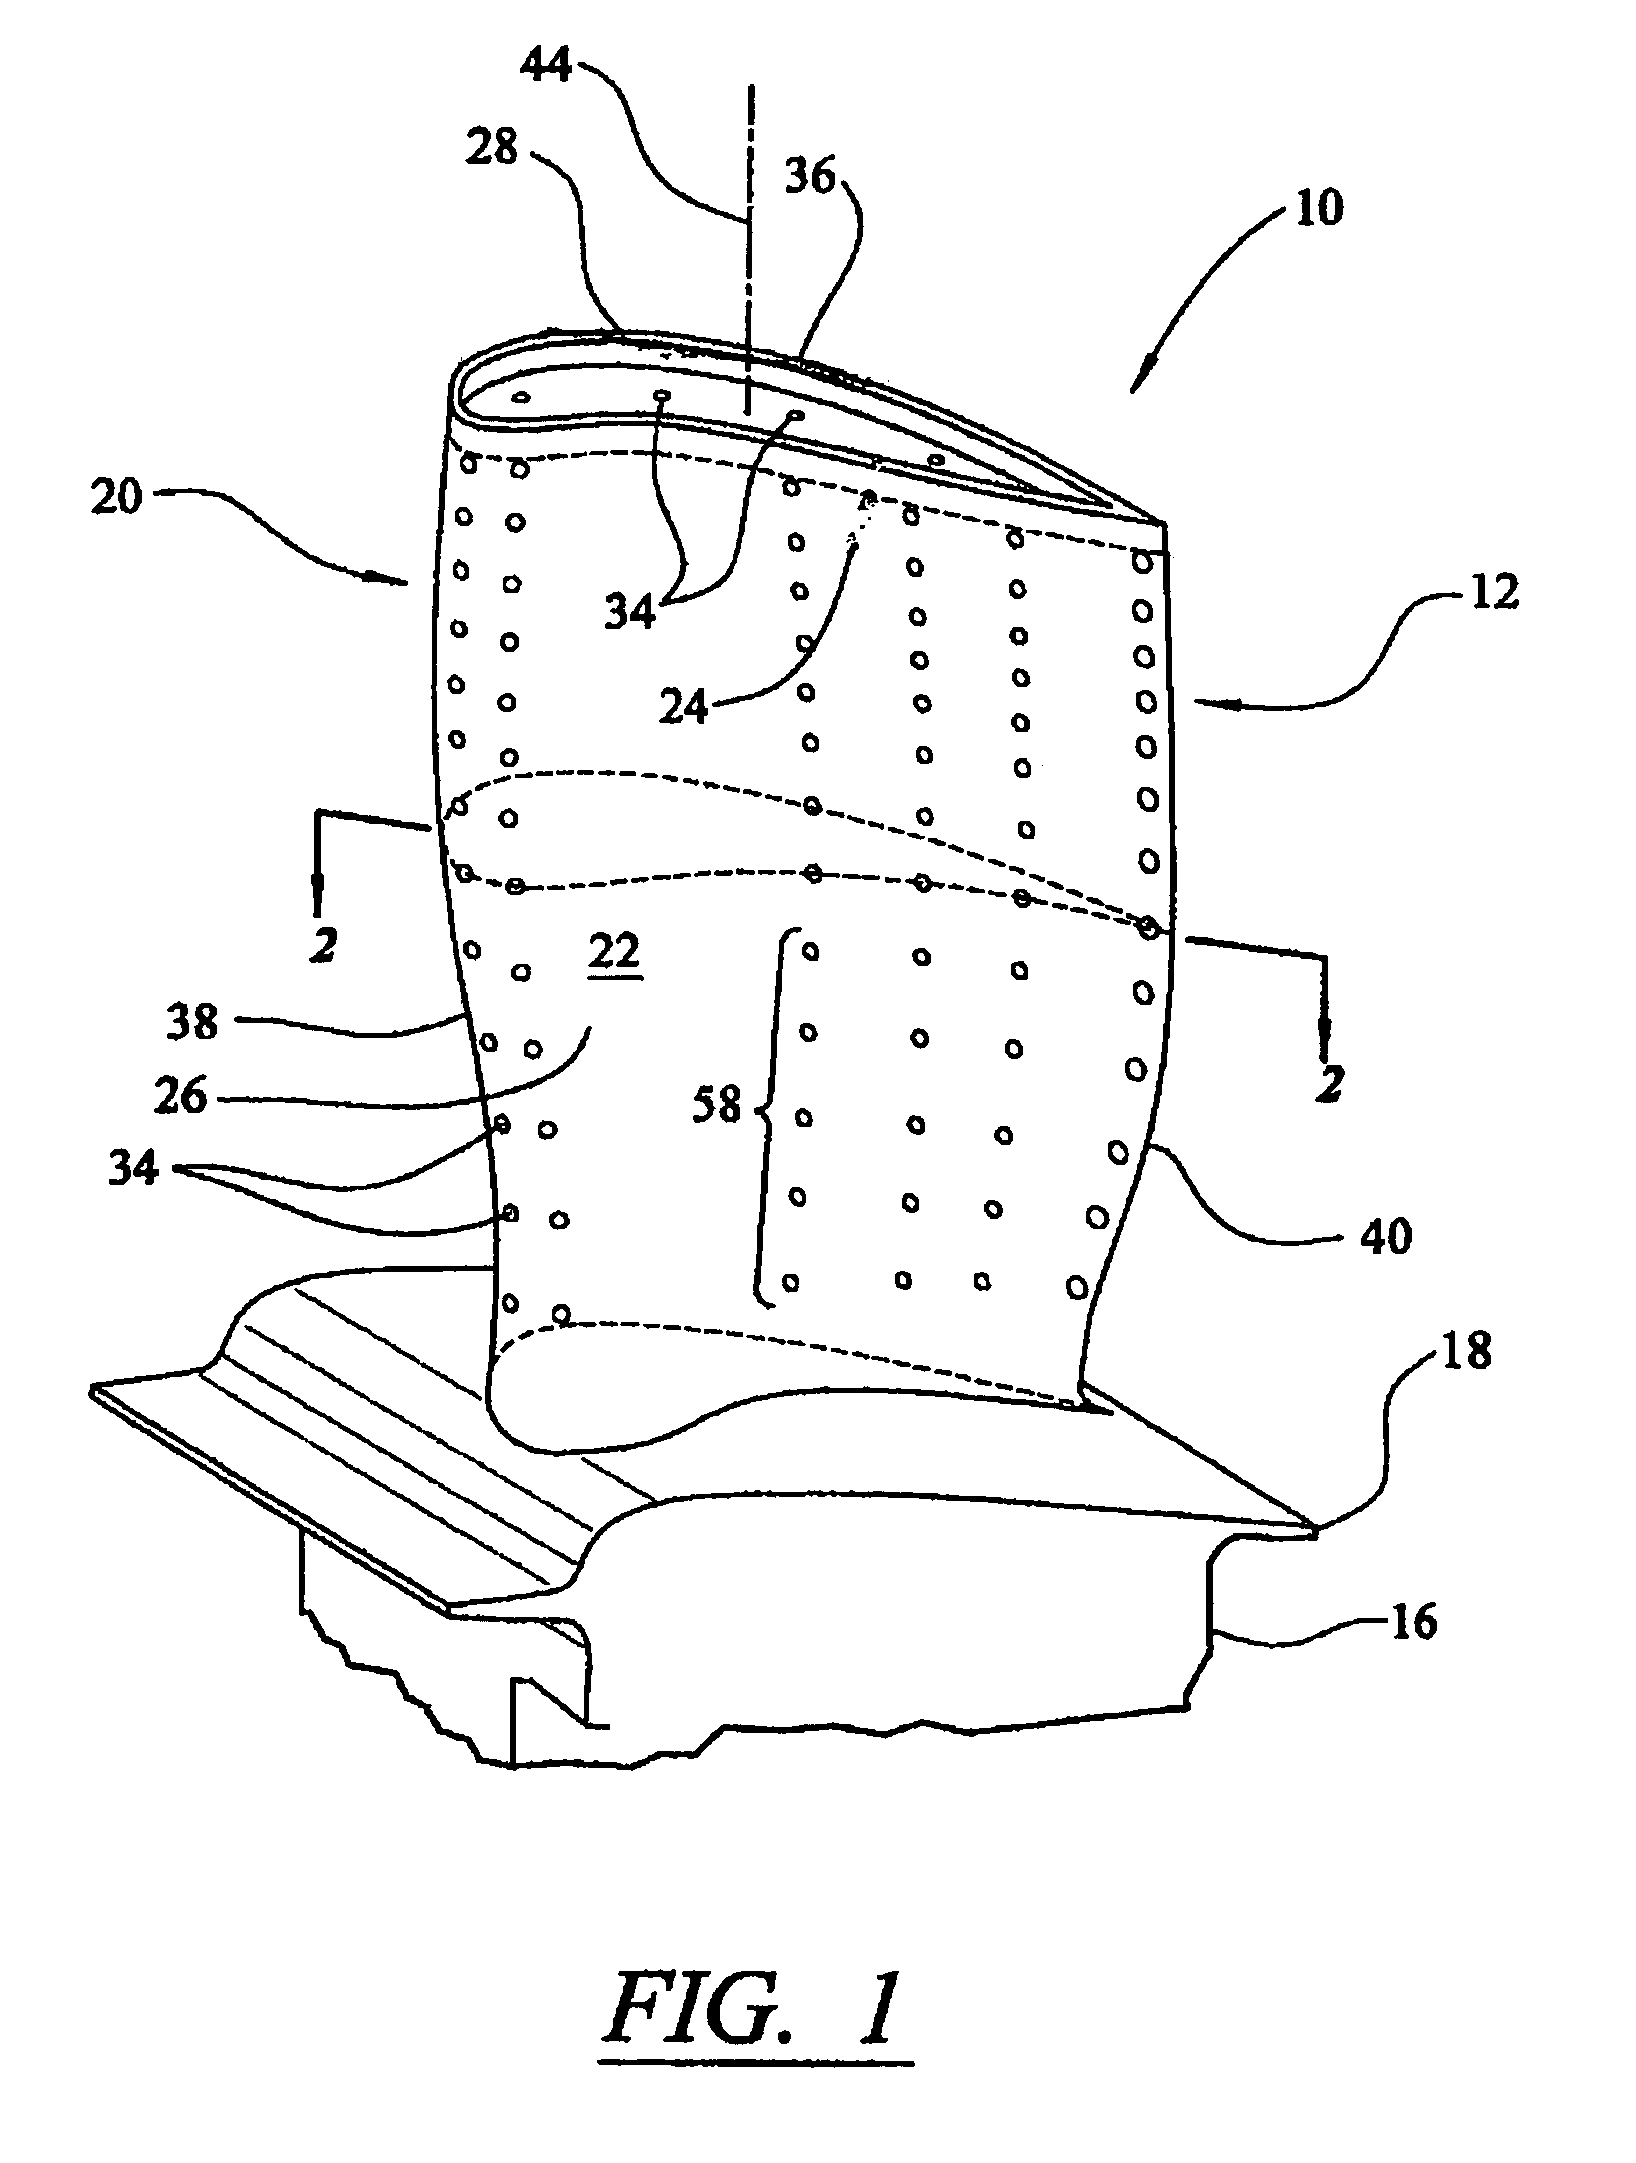 Cooling system for an outer wall of a turbine blade